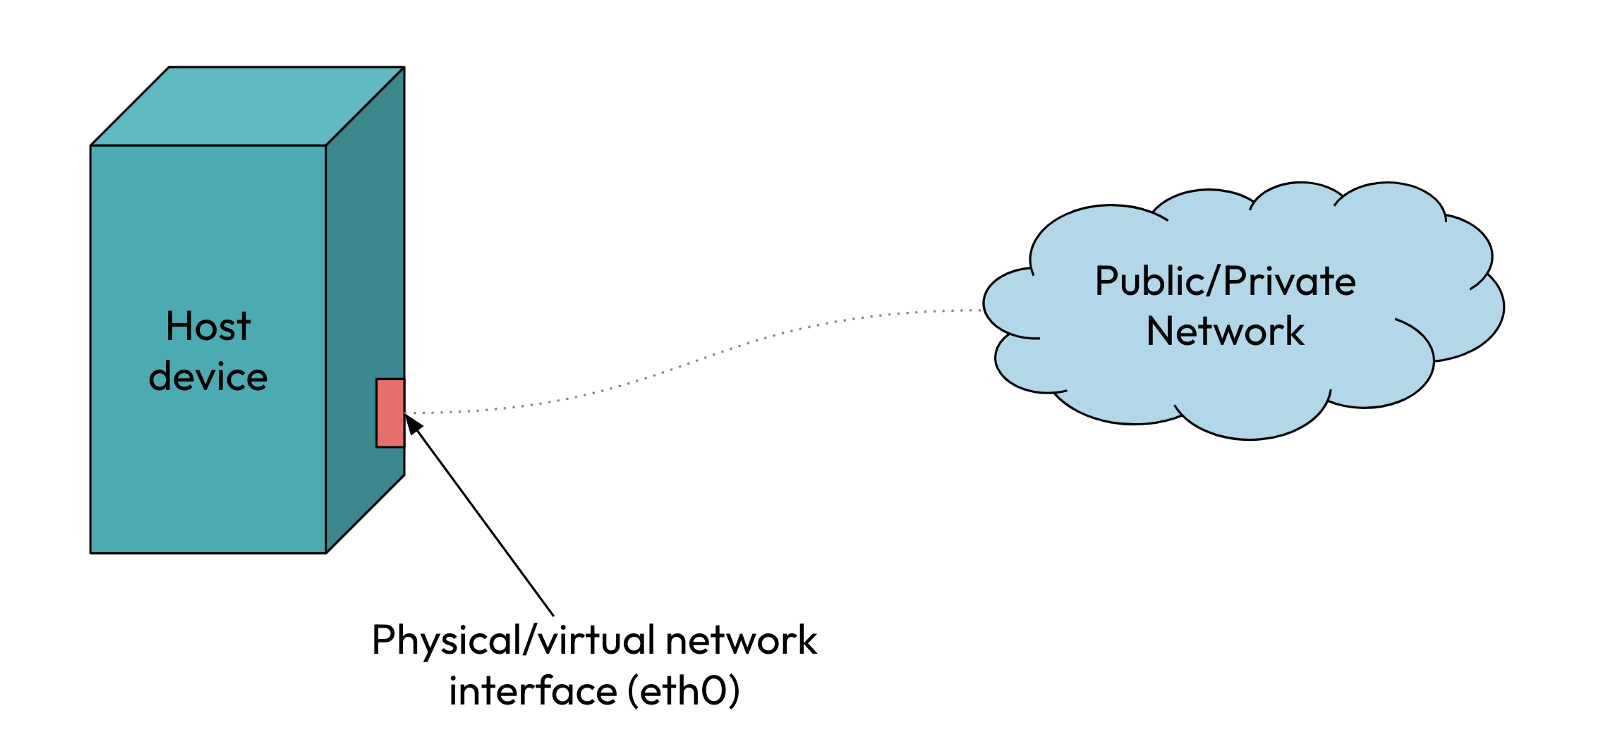 Host with a network interface to connect to public/private network